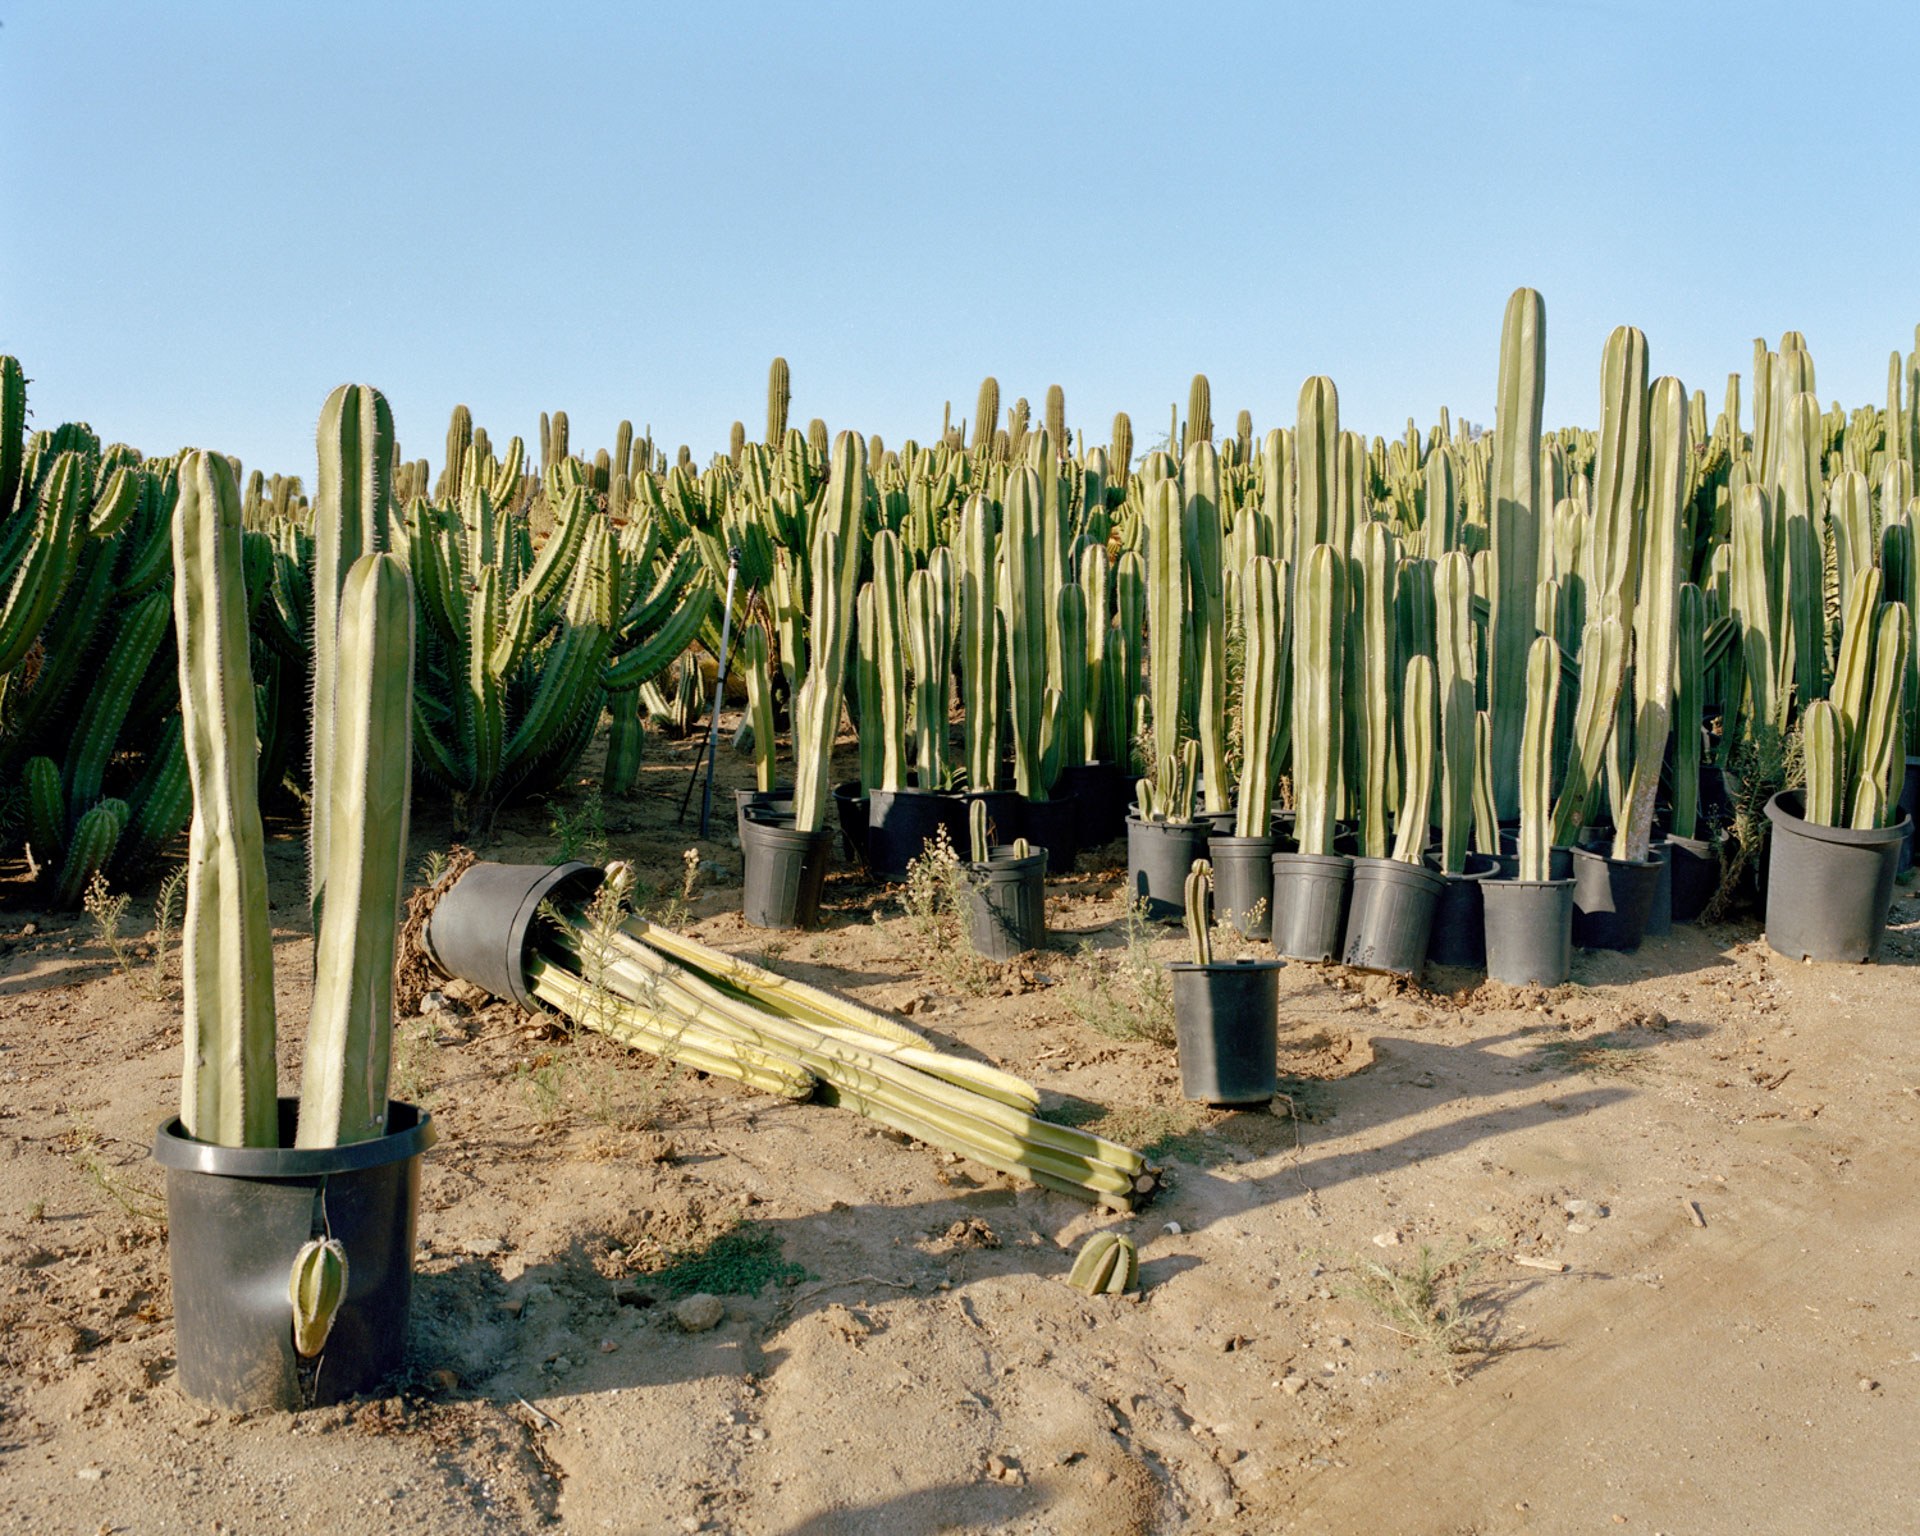 The Big, Thorny Business of Palm Trees and Cacti | WIRED